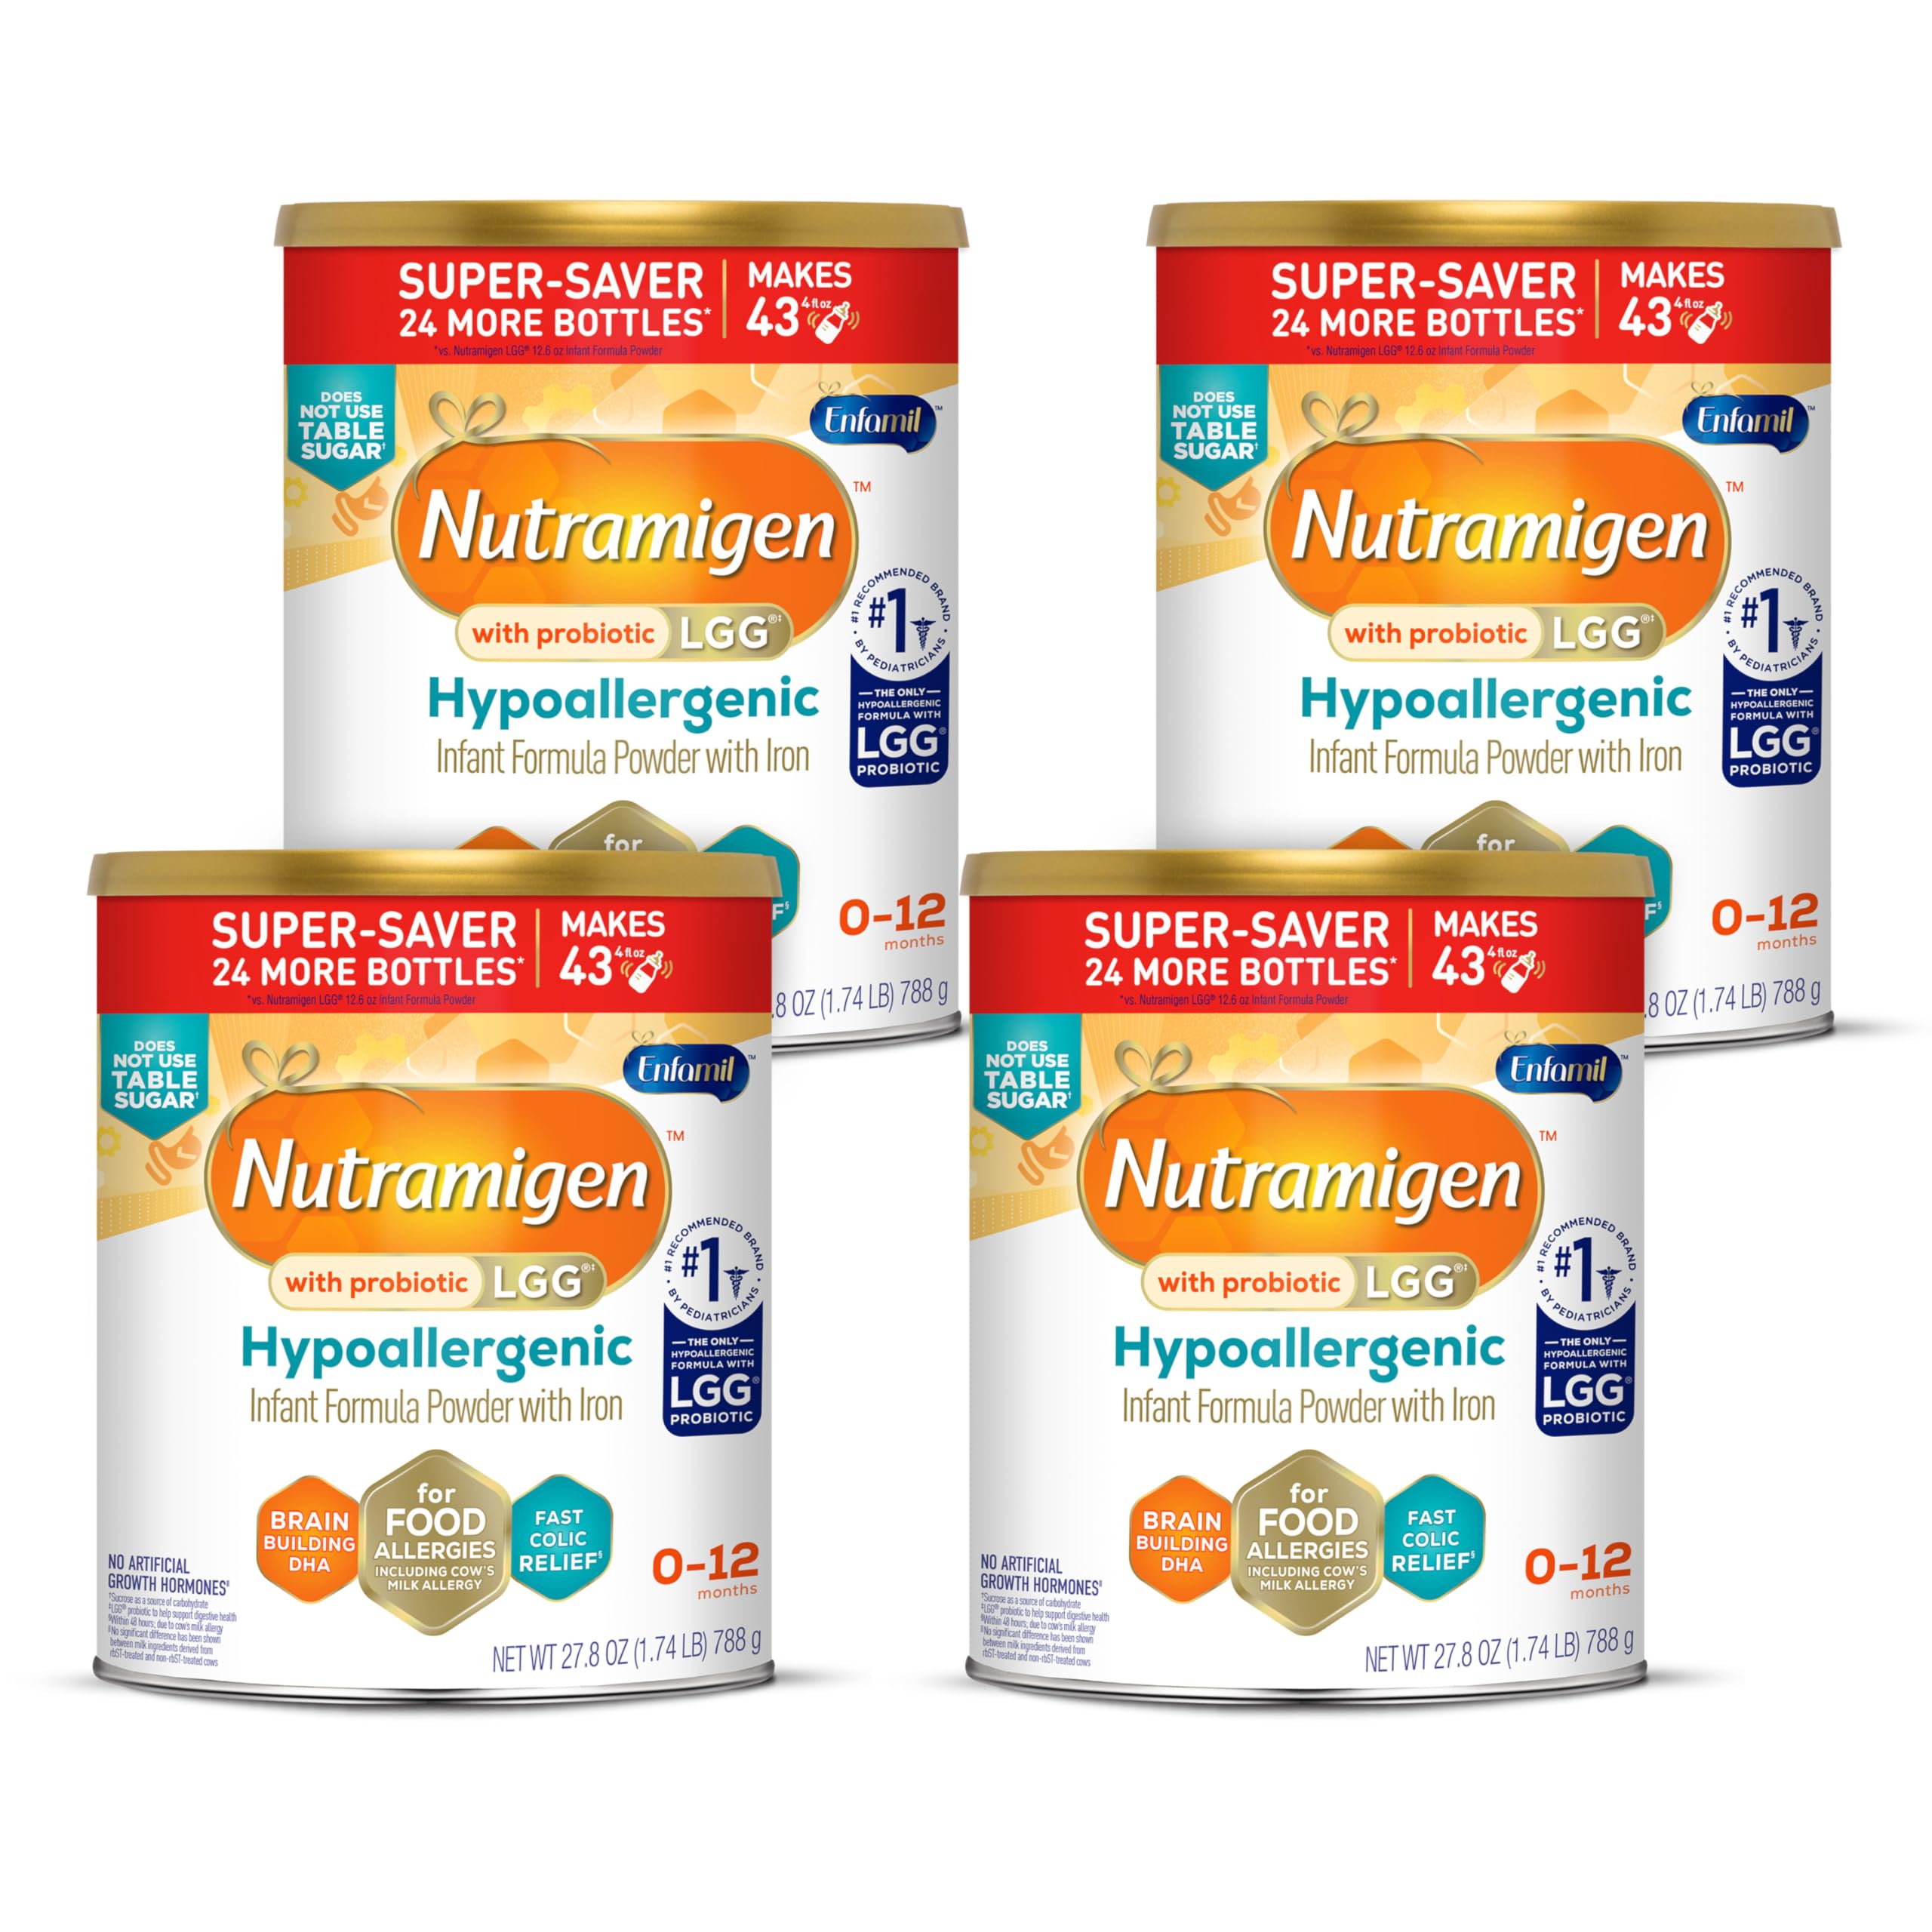 Enfamil Nutramigen Infant Formula, Hypoallergenic and Lactose Free Formula with Enflora LGG, Fast Relief from Severe Crying and 